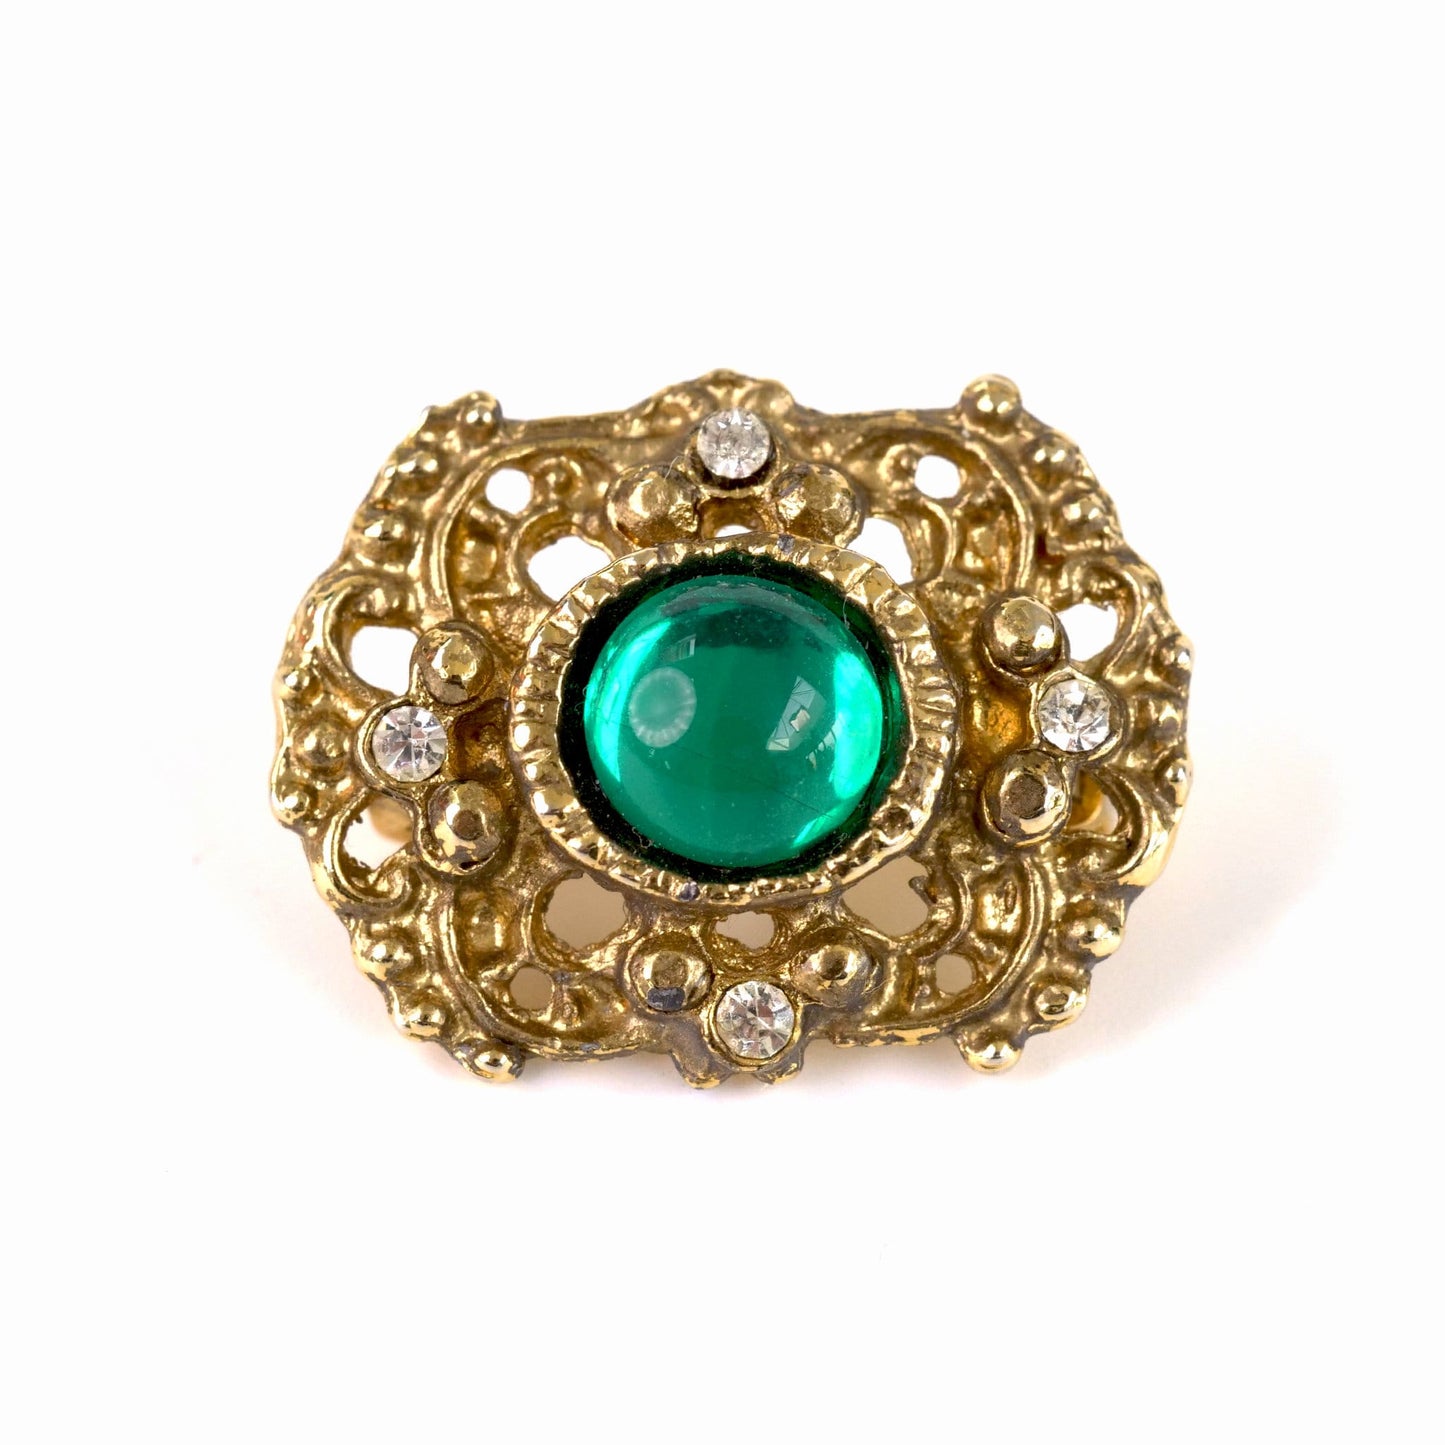 Vintage Victorian Revival Brooch with Gripoix Style Glass Cabochon and Clear Rhinestones